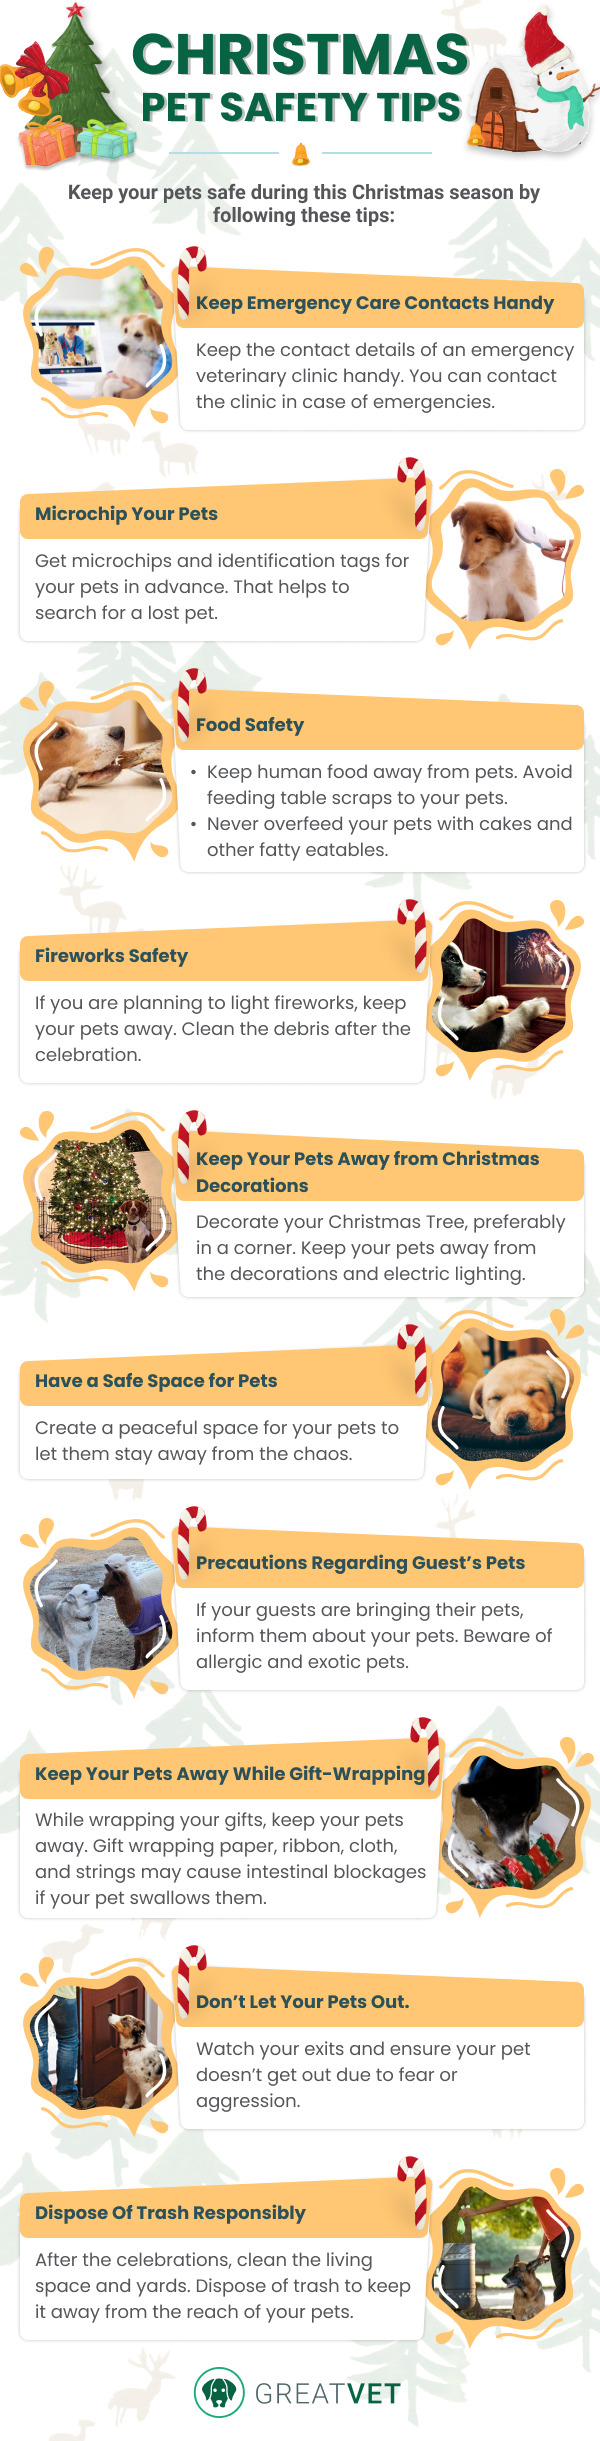 Christmas pet safety tips